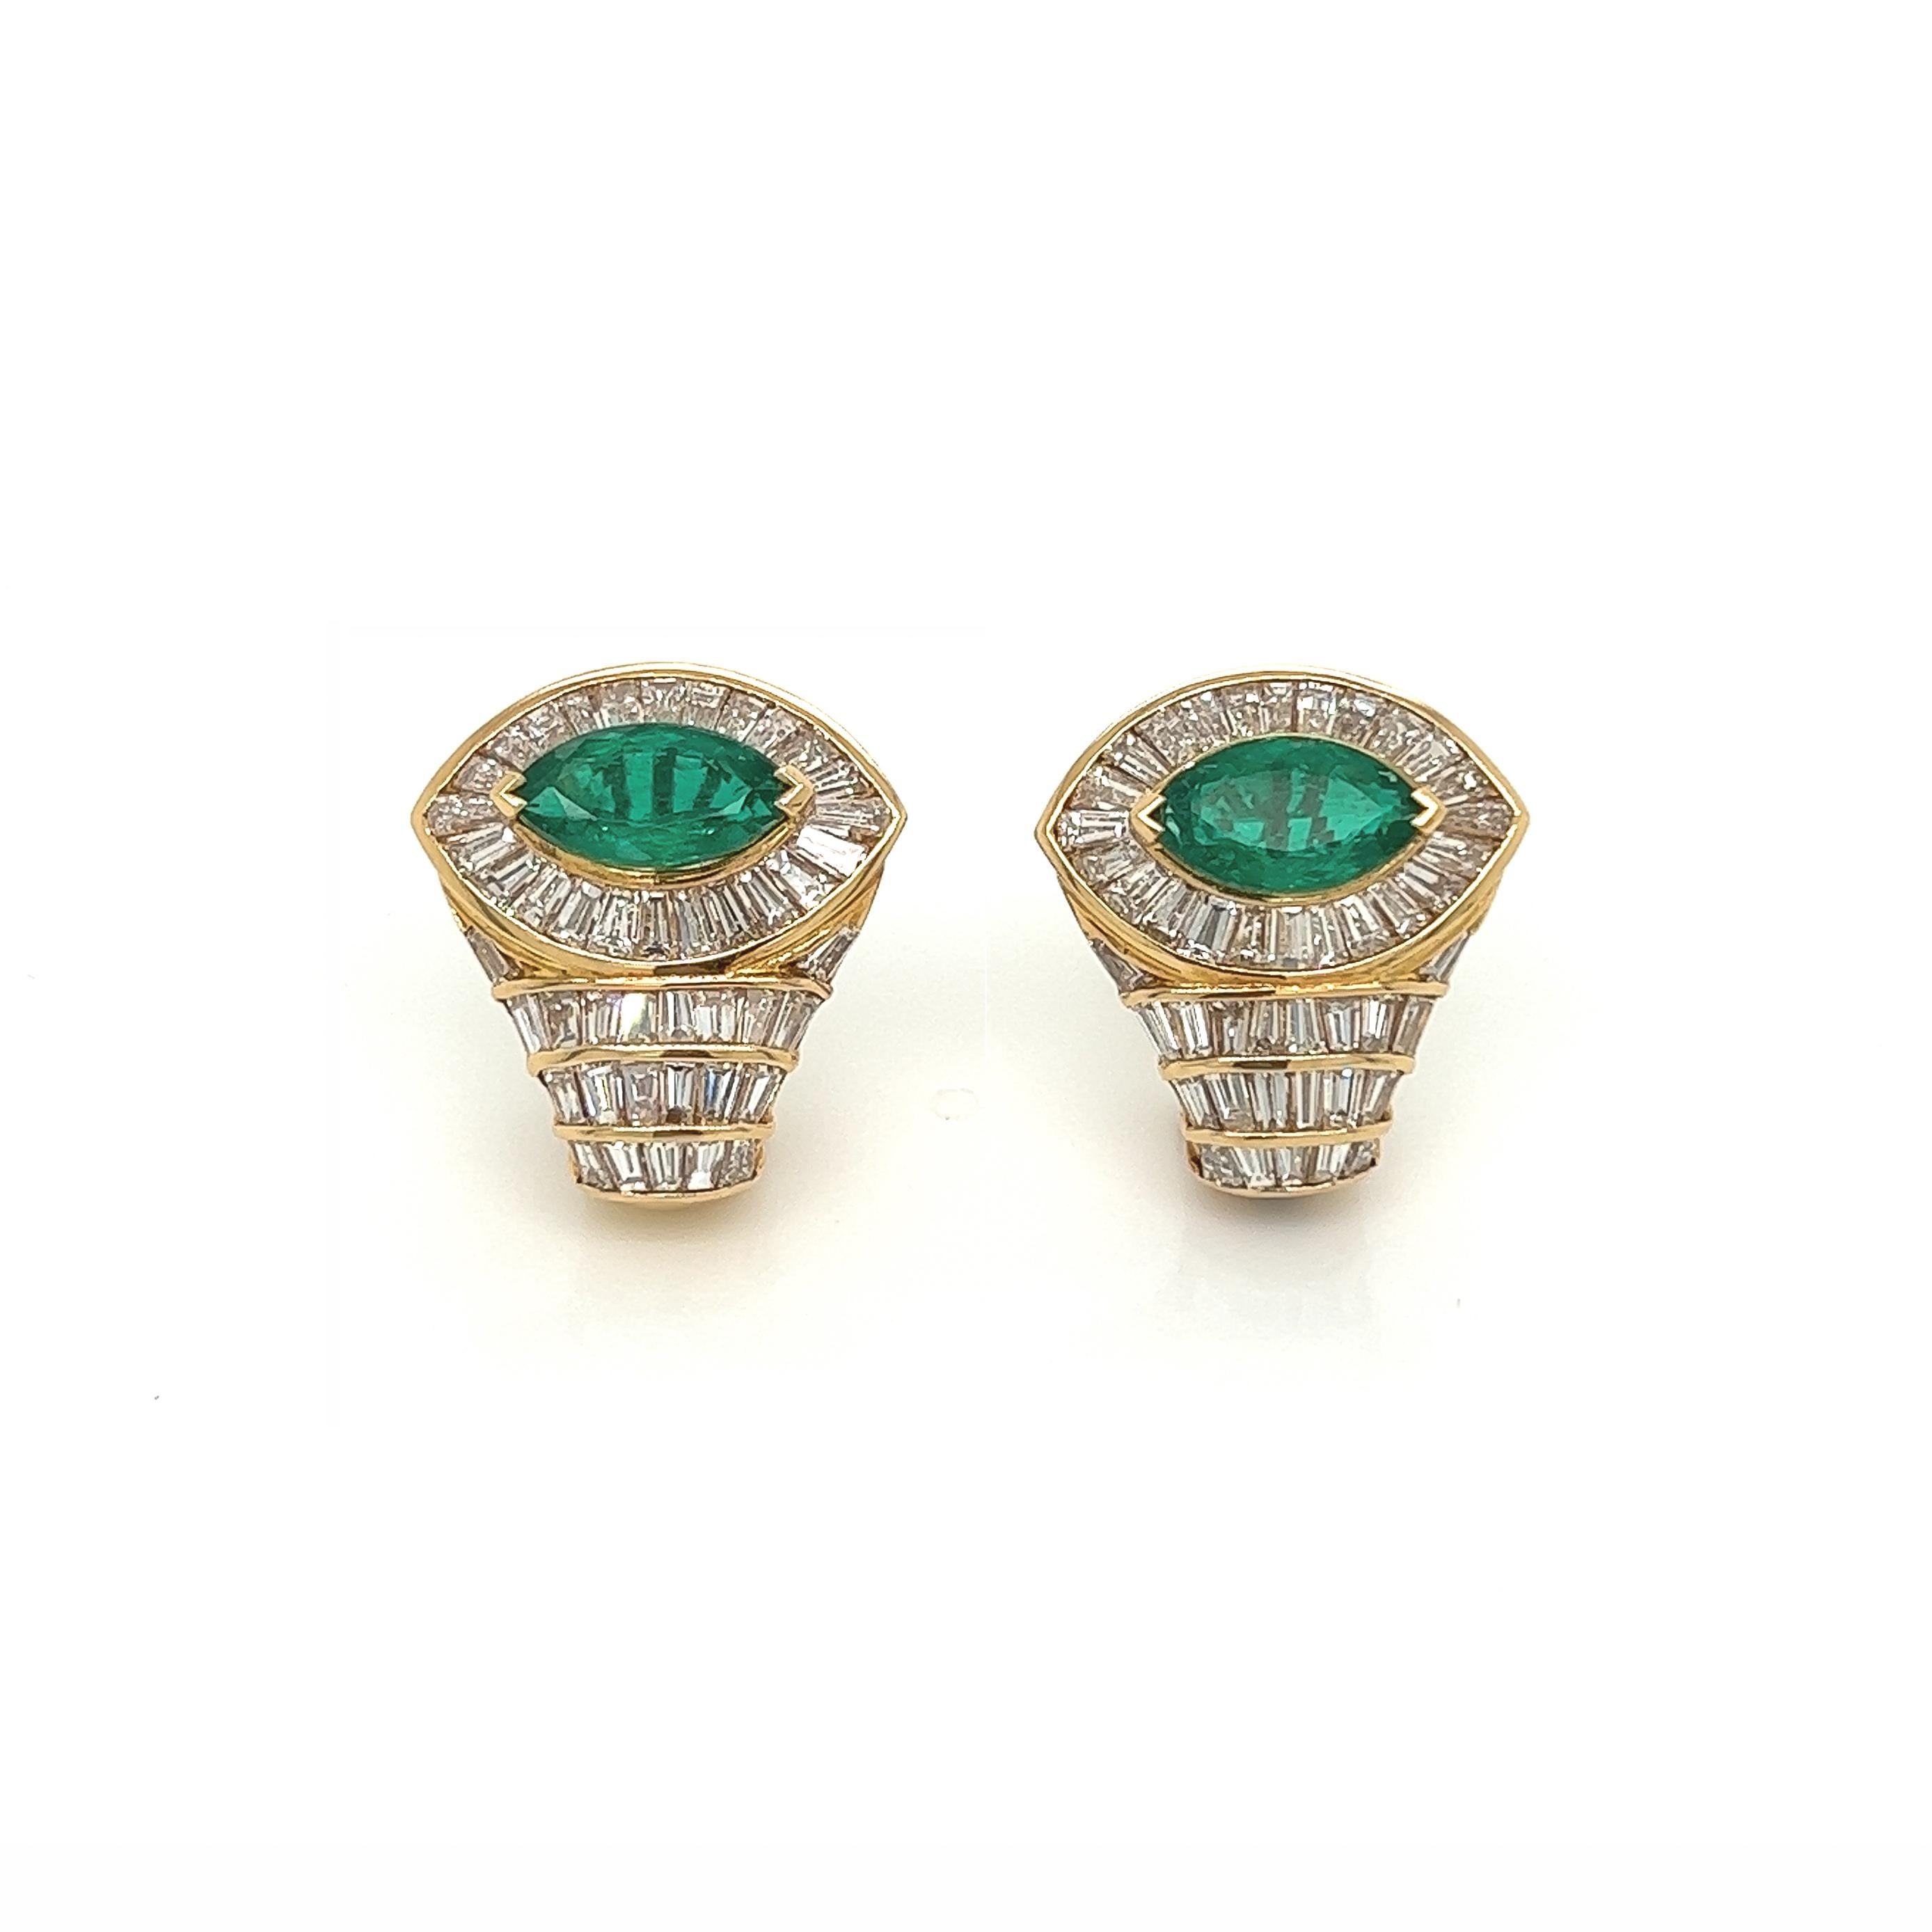 5.10 Total Carat 18K Yellow Gold Diamond & Colombian Marquise Emerald Earrings

SPECIFICATIONS:
-Main Stones: Marquise Cut Colombian Green Emeralds 2.50ct
-Side Stones: 2.60ct Baguette Cut Diamonds, F-G Color, VVS-VS Clarity
-Metal: 18K Yellow